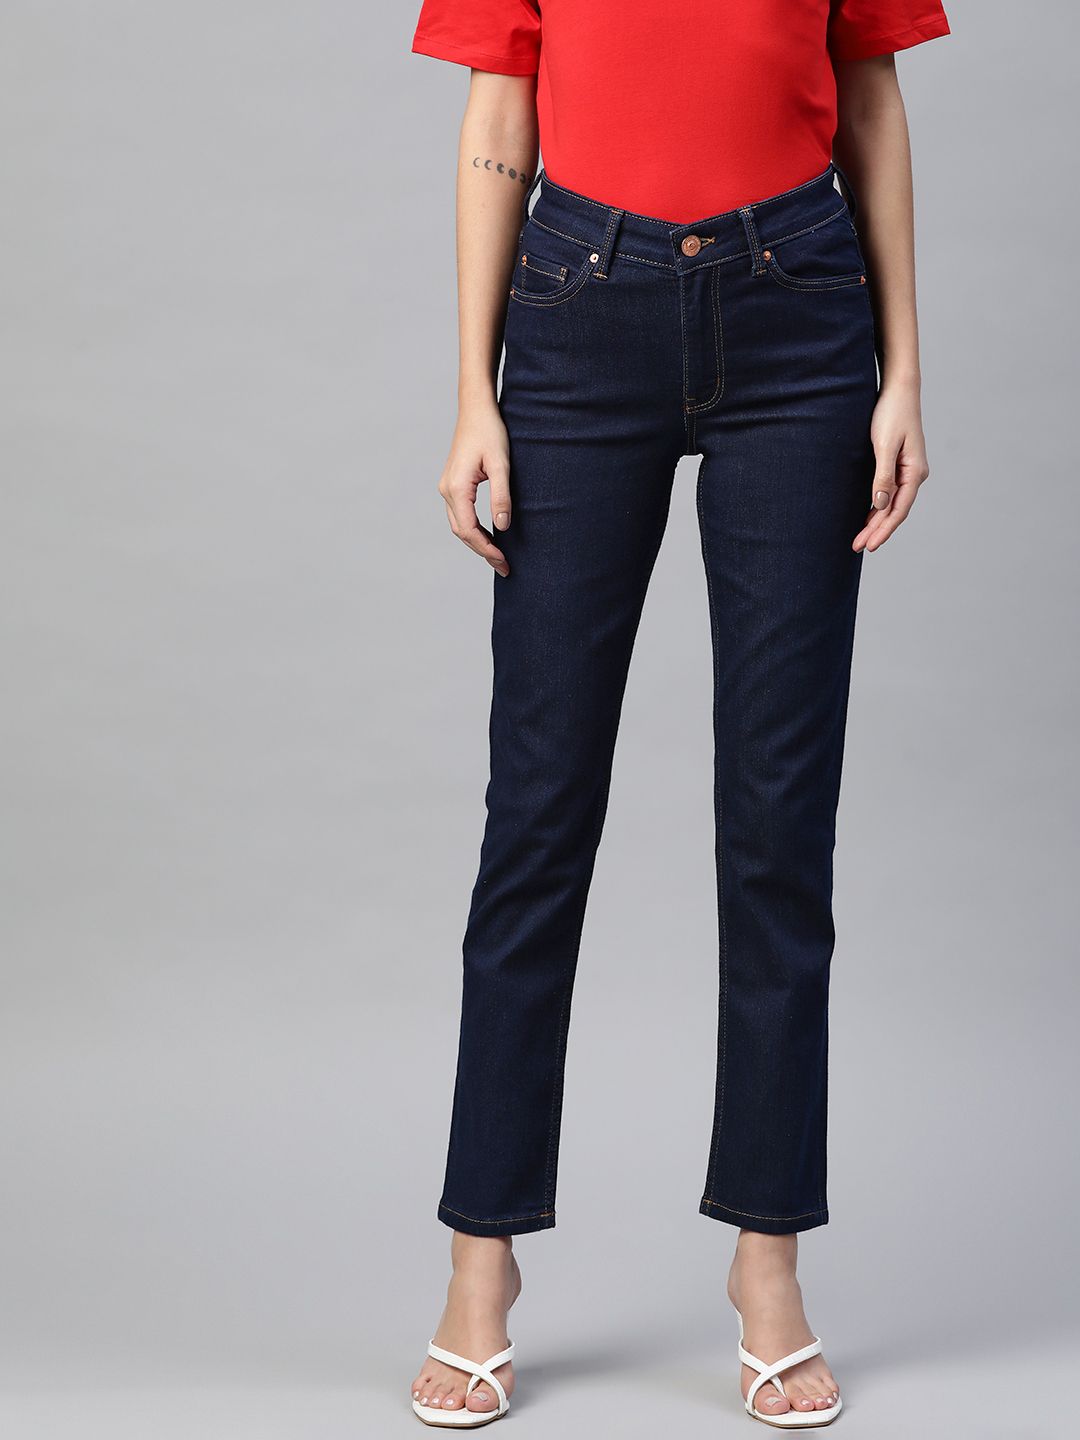 Marks & Spencer Women Navy Blue Lily Slim Fit Stretchable Jeans Price in India